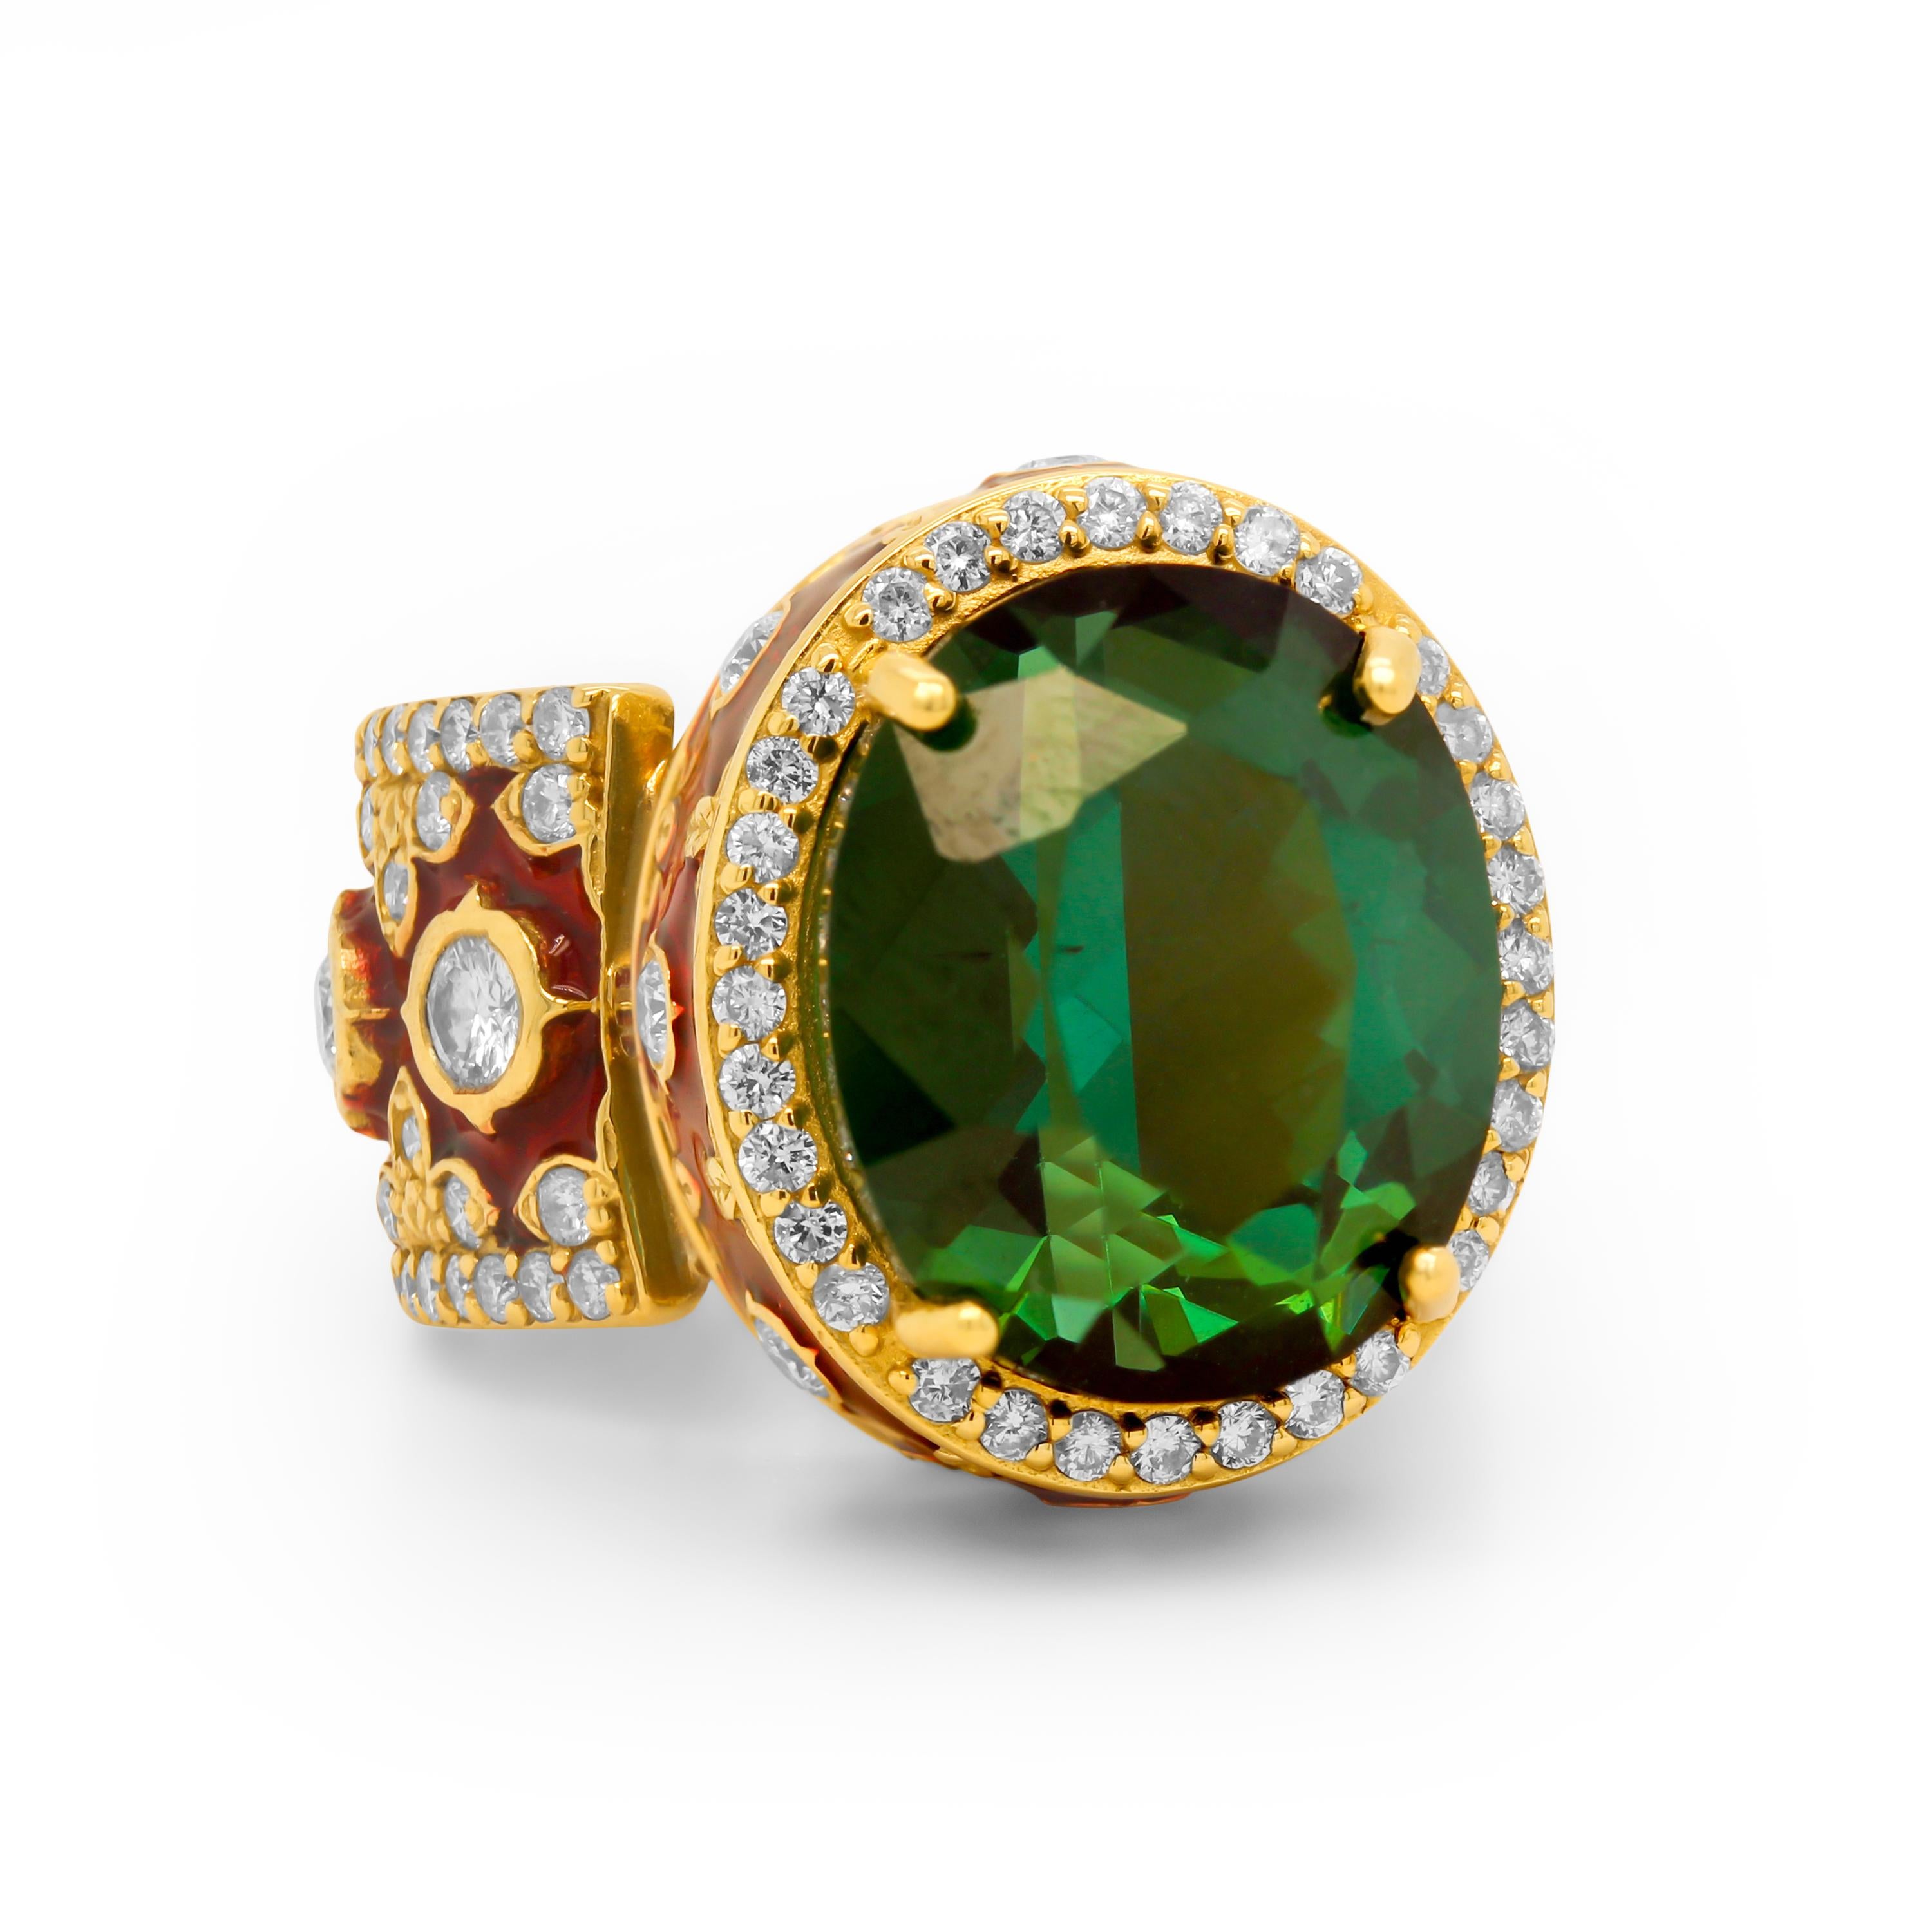 Stambolian 18K Gold Diamond Red Enamel Green Tourmaline Center Cocktail Ring

This one-of-a-kind ring by Stambolian features a gorgeous, oval-cut, Green Tourmaline center. The ring is made in solid 18k yellow gold with red enamel.

11.33 carat Green